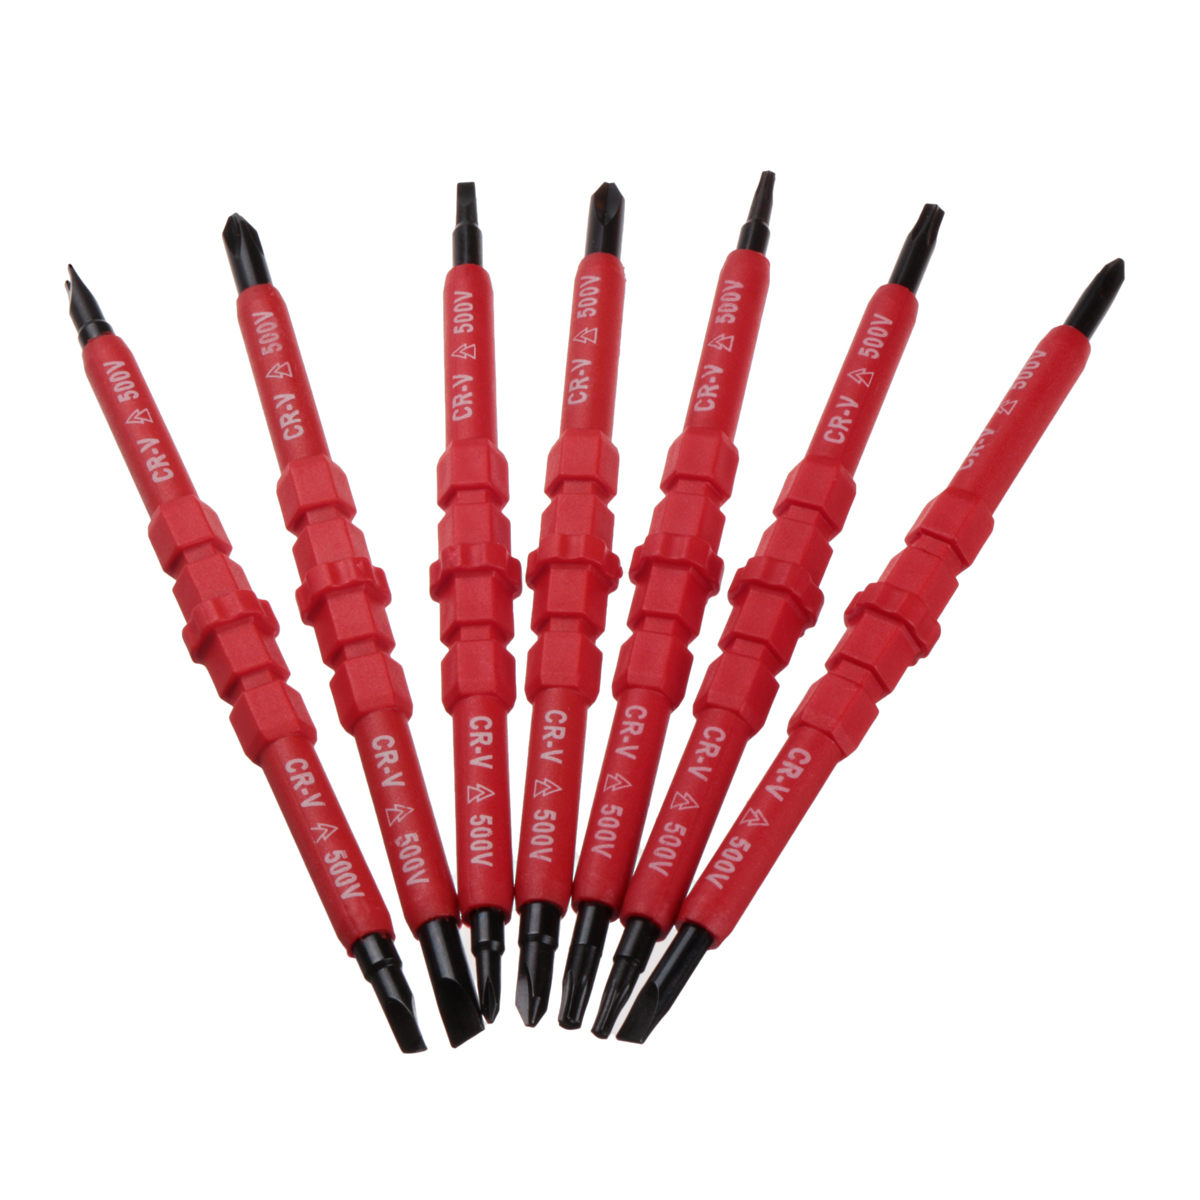 Raitooltrade-HT01-7pcs-Electronic-Insulated-Hand-Screwdriver-Tools-Accessory-Set-1045867-2